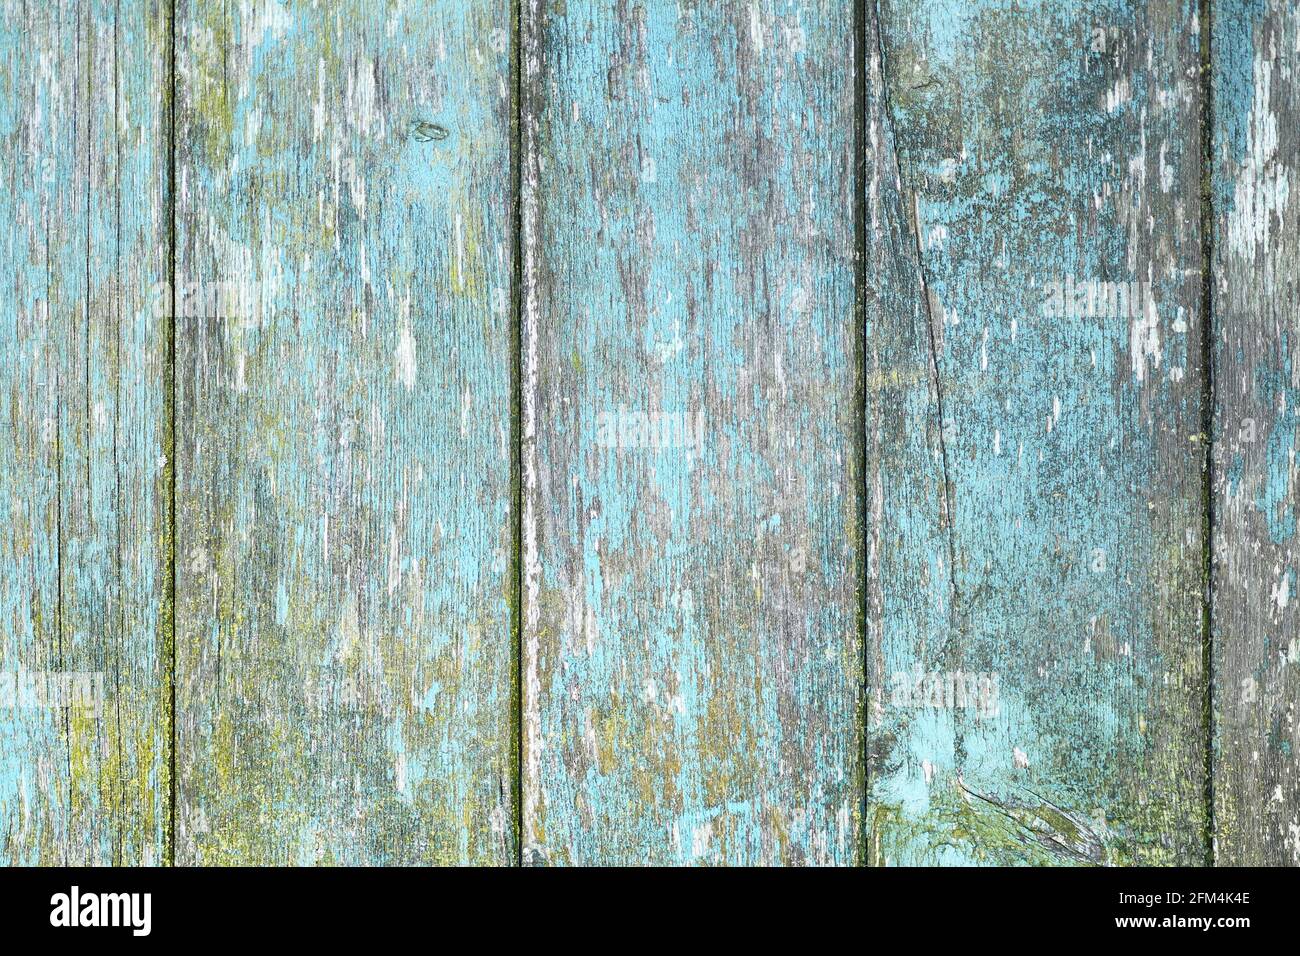 Wooden planks background with teal blue and yellow colored old weathered planks with chipped paint Stock Photo